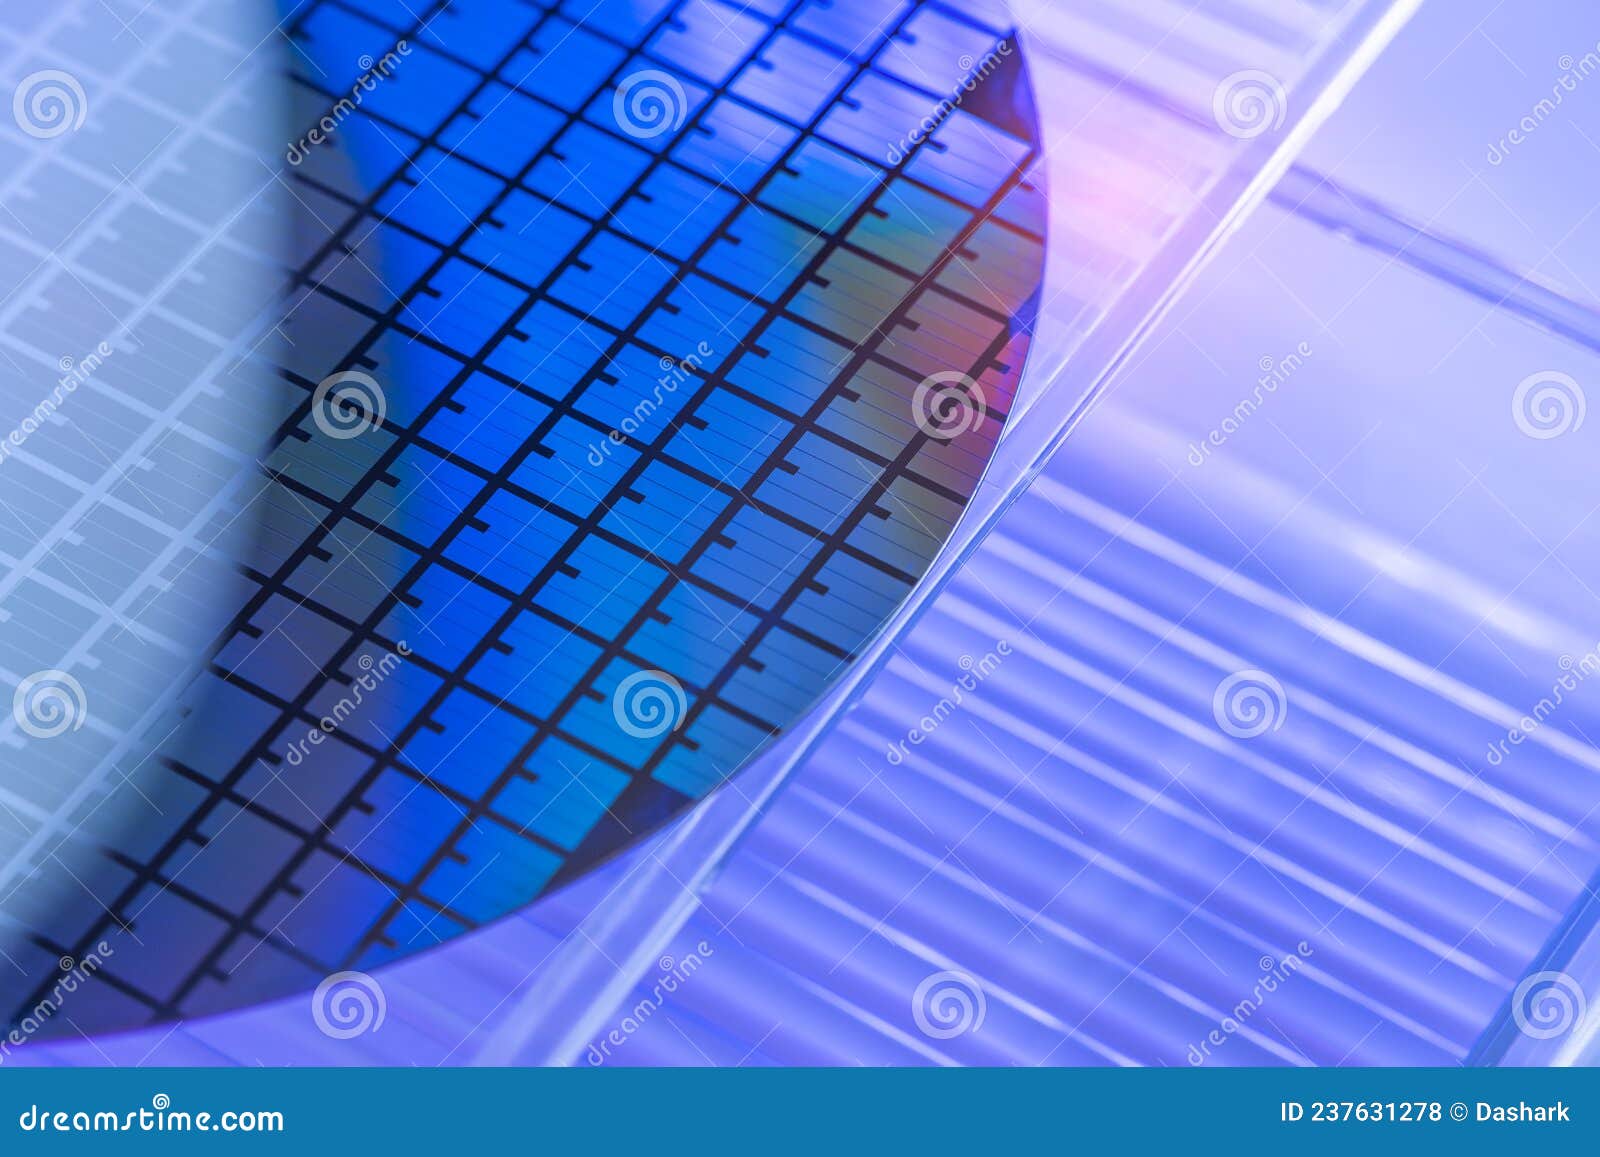 silicon wafer with microchips used in electronics